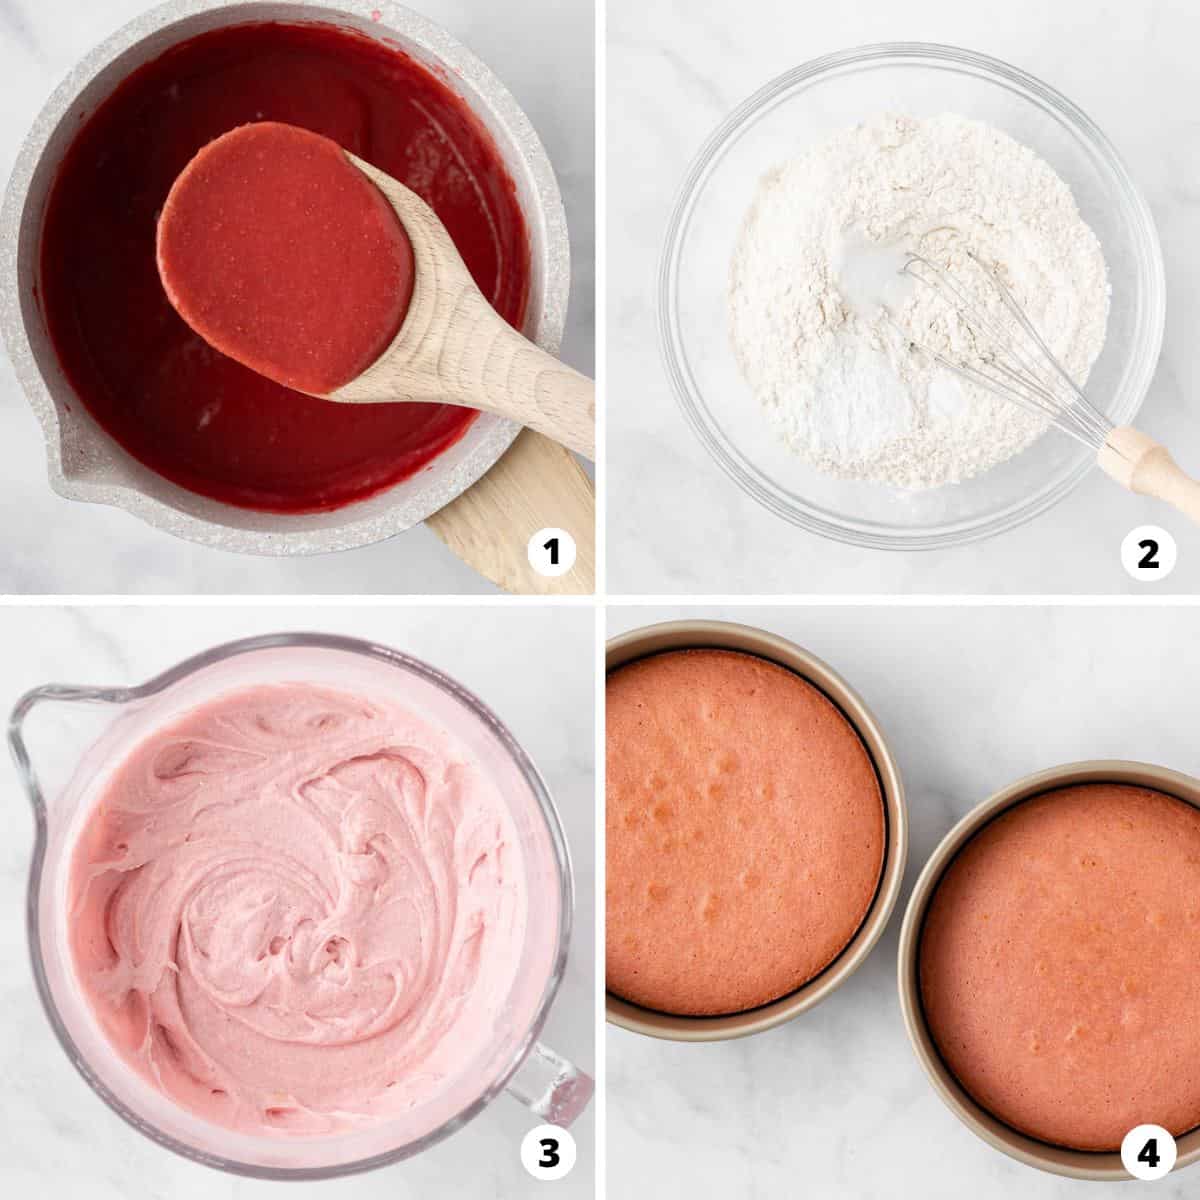 Showing how to make strawberry cake in a 4 step collage.